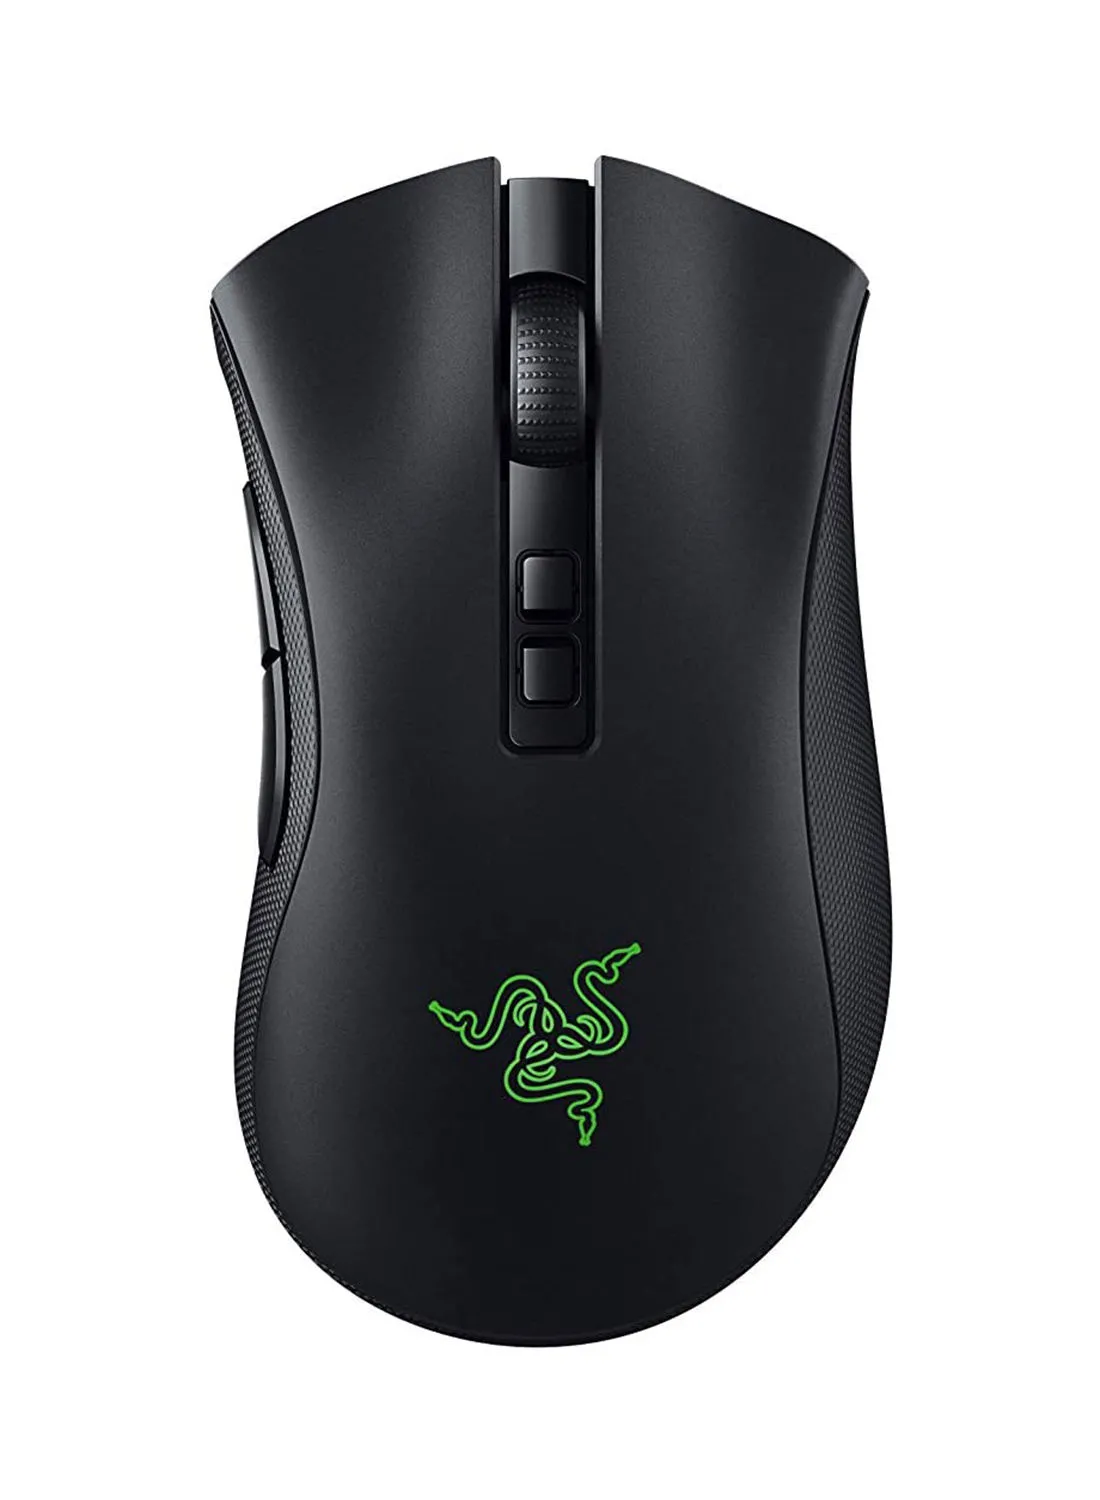 RAZER DeathAdder v2 Pro Wireless Gaming Mouse: 20K DPI Optical Sensor - 3x Faster Than Mechanical Optical Switch - Chroma RGB Lighting - 70 Hr Battery Life - 8 Programmable Buttons - Classic